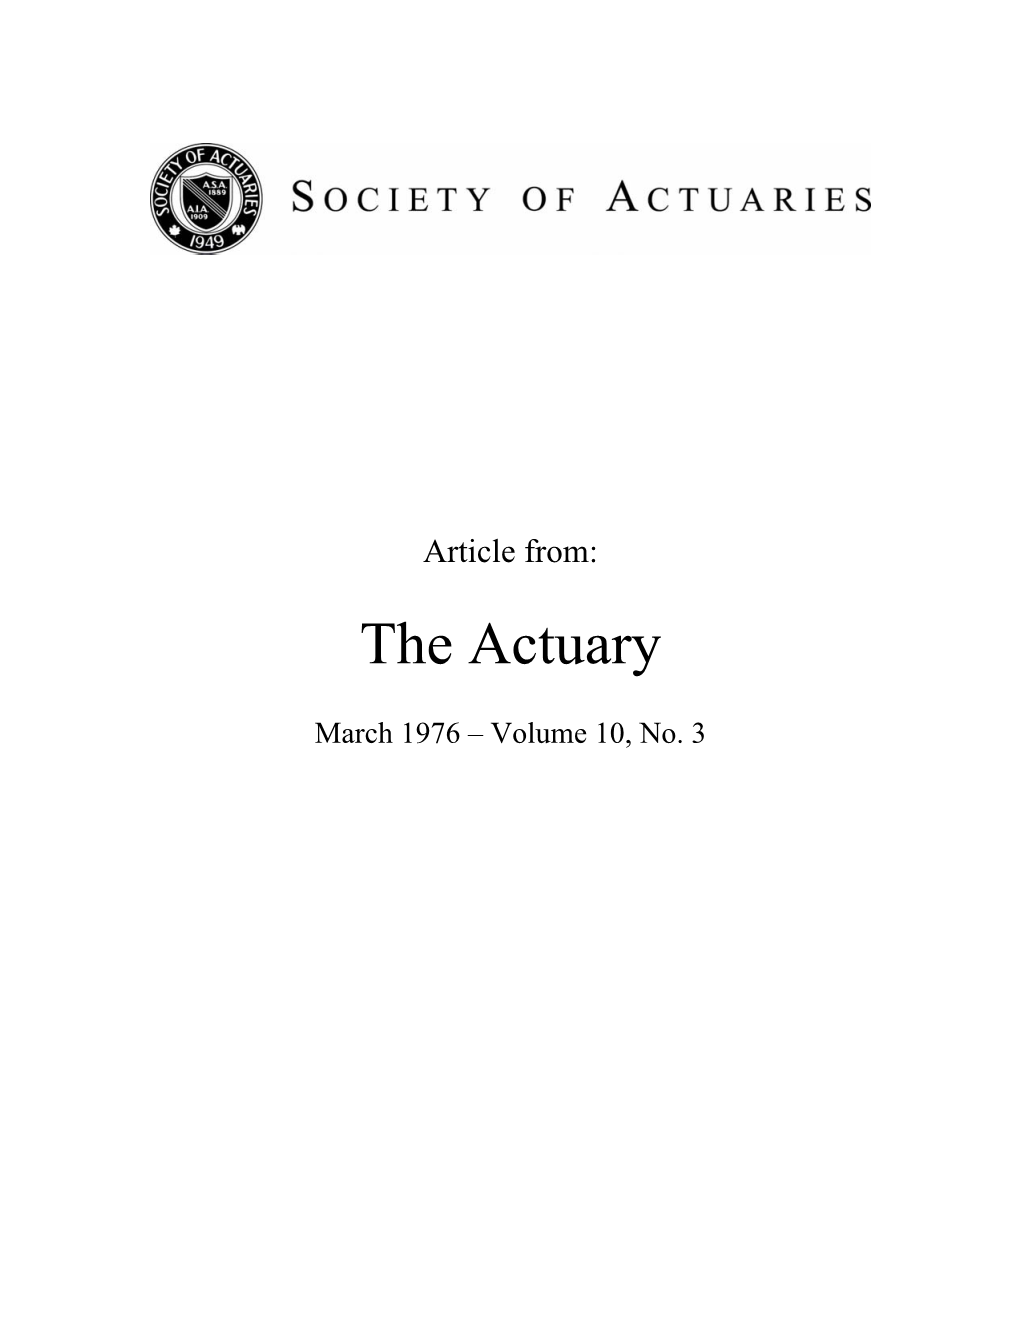 The Actuary Vol. 10, No. 3 the International Actuarial Notation